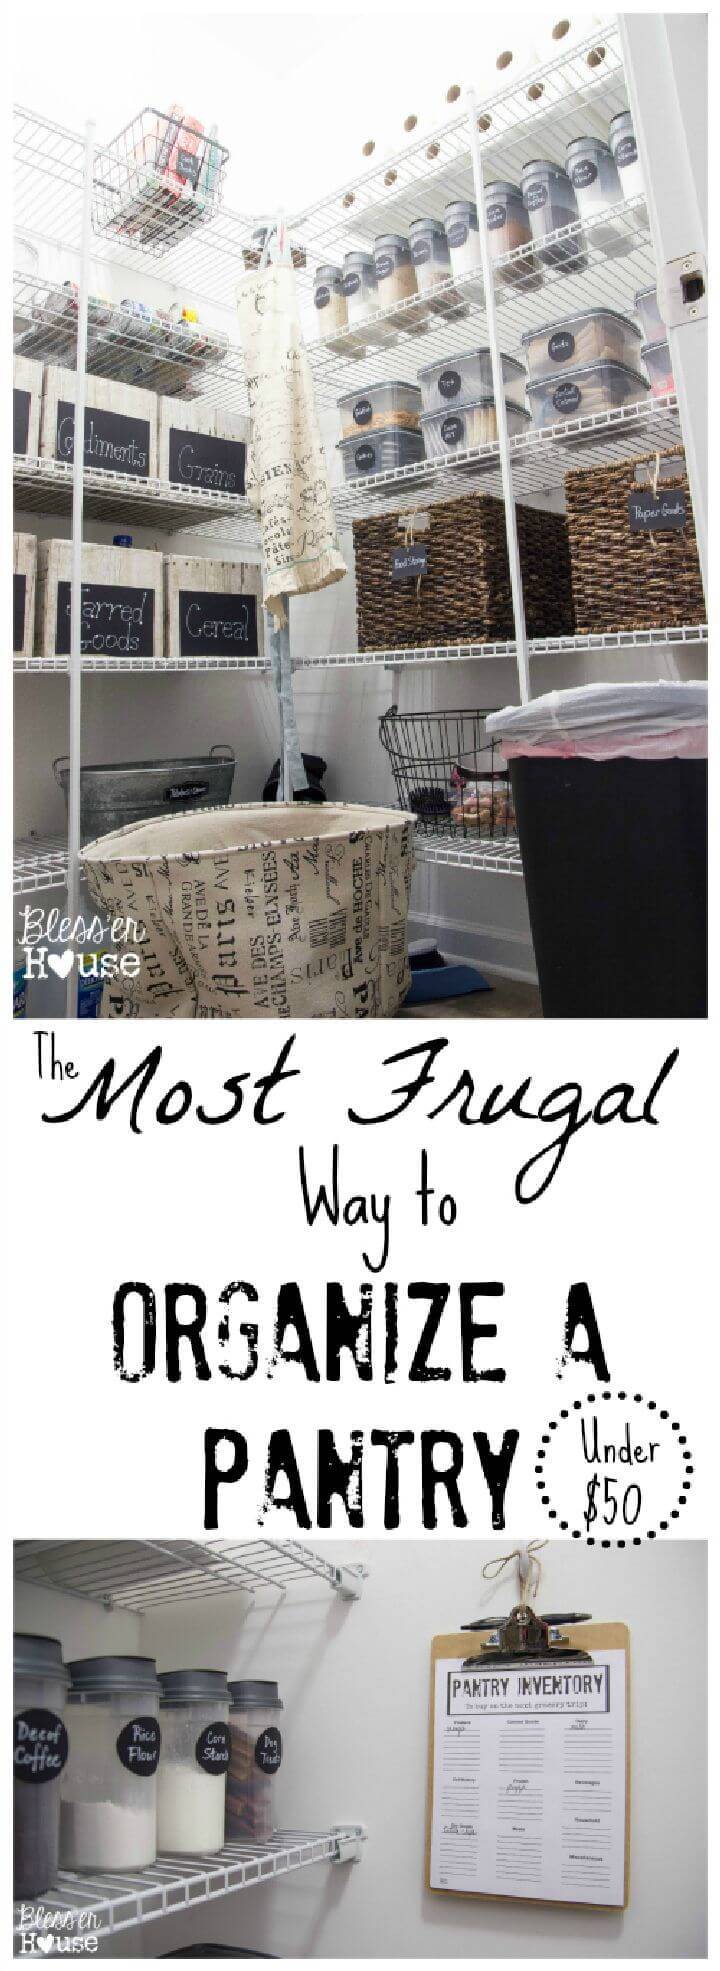 he Most Frugal Way to Organize a Pantry